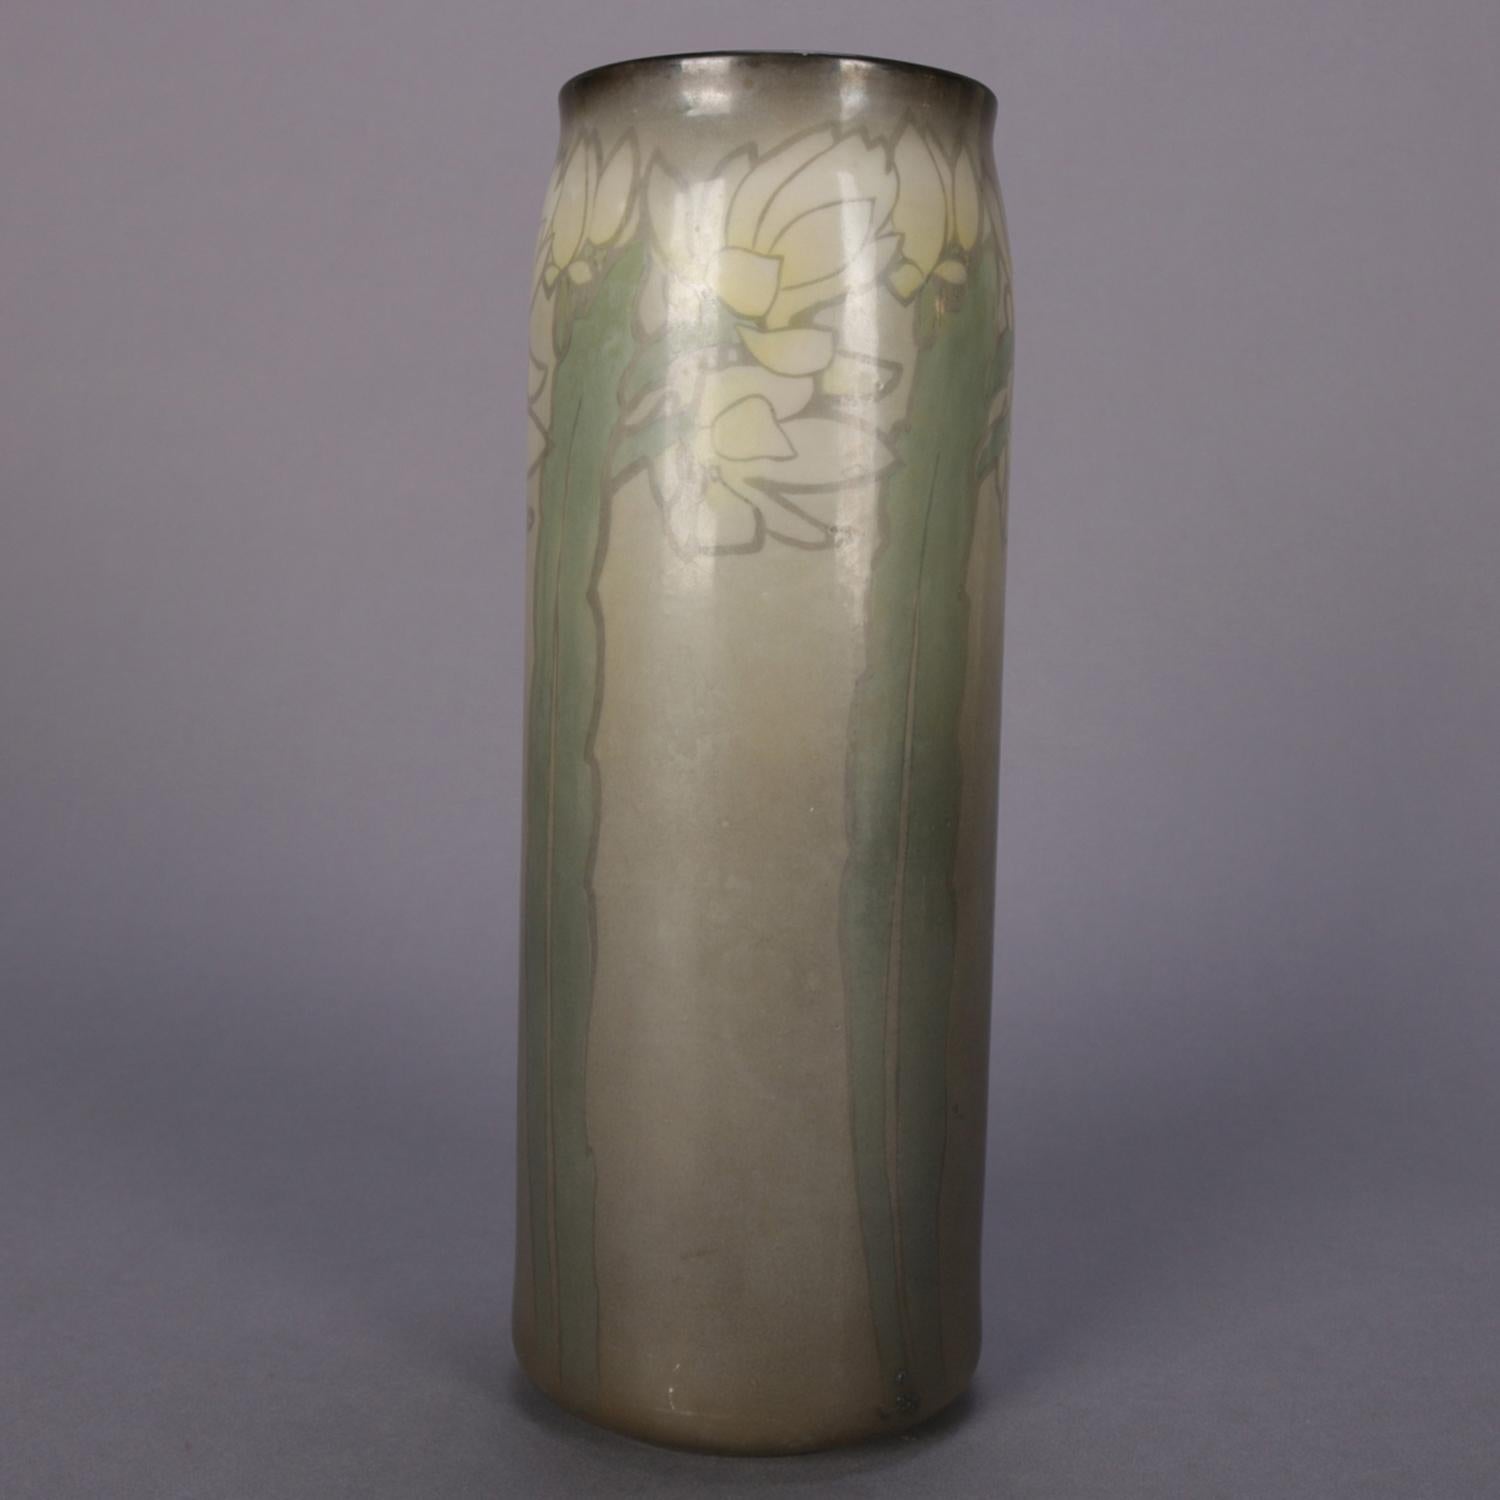 An antique Arts & Crafts marblehead school art pottery vase by Belleek featuring cylinder form with stylized floral motif, artist signed Wik and Belleek stamp on base, reminiscent of rookwood, circa 1910

Measures: 11.25